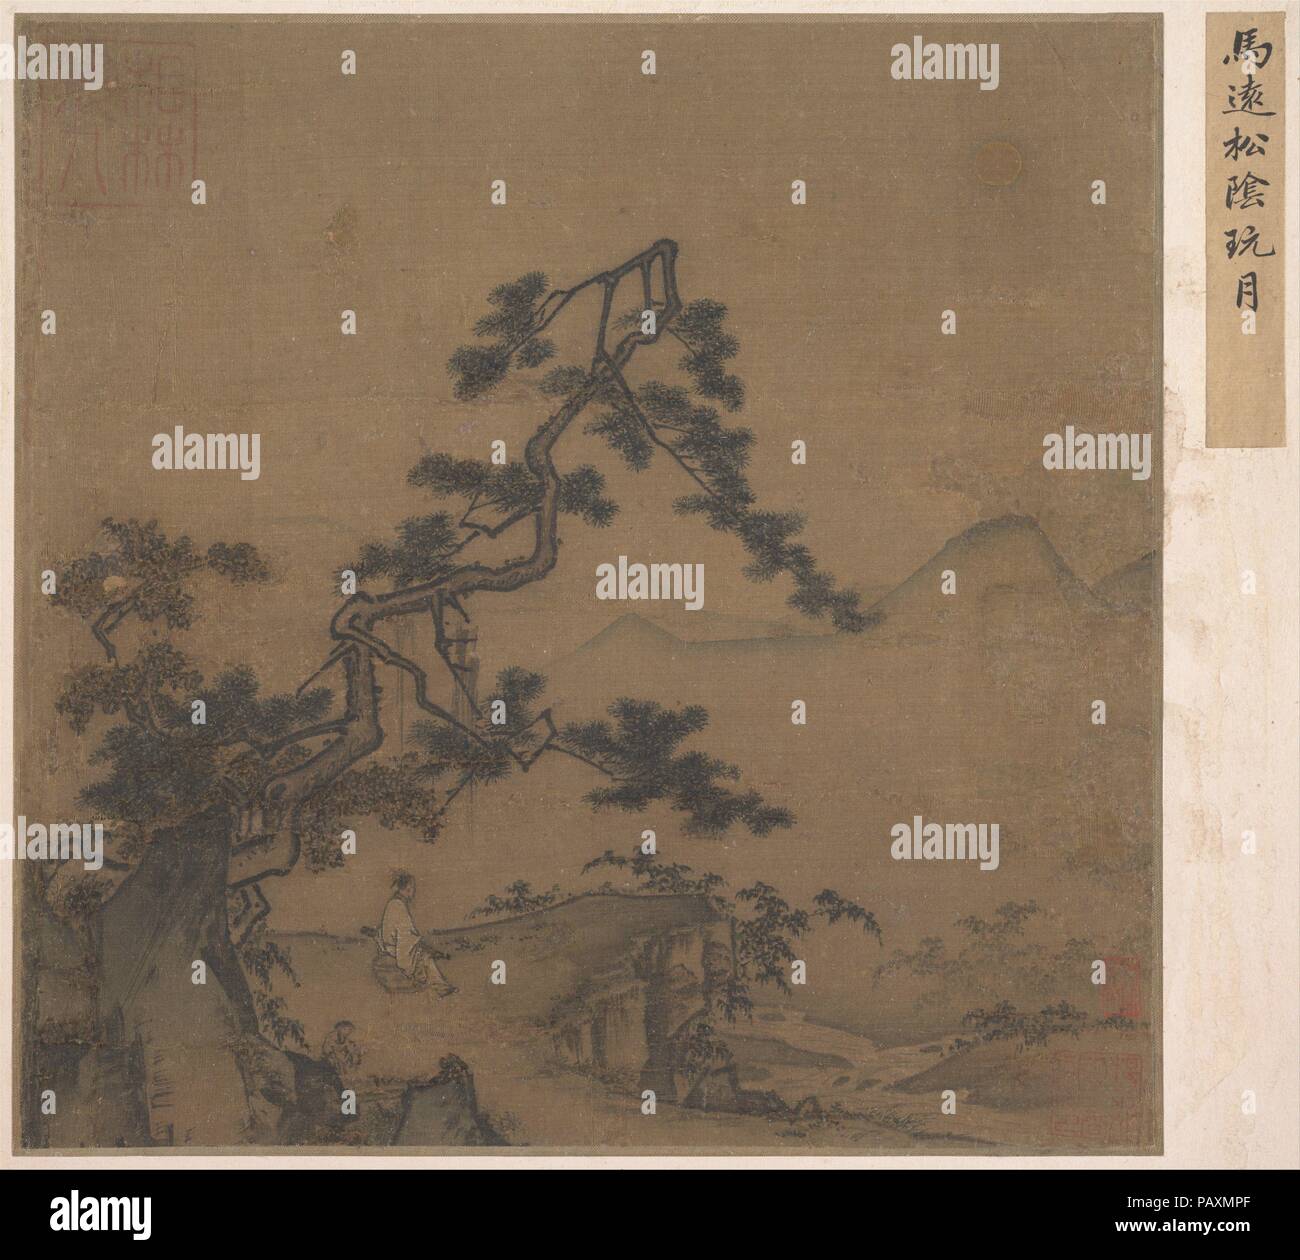 Viewing the Moon under a Pine Tree. Artist: After Ma Yuan (Chinese, active ca. 1190-1225). Culture: China. Dimensions: 10 x 10 in. (25.4 x 25.4 cm). Date: early 13th century.  This painting, formerly attributed to the leading court artist Ma Yuan, repeats the motifs and brushwork for which Ma was famous. A scholar seated beneath a great pine tree holds a zither in his lap, while a young attendant dozes nearby. Although the work lacks the psychic energy of Ma Yuan's paintings, the relaxed yet forceful round brushwork suggests the hand of an early and close follower of the master. Museum: Metrop Stock Photo